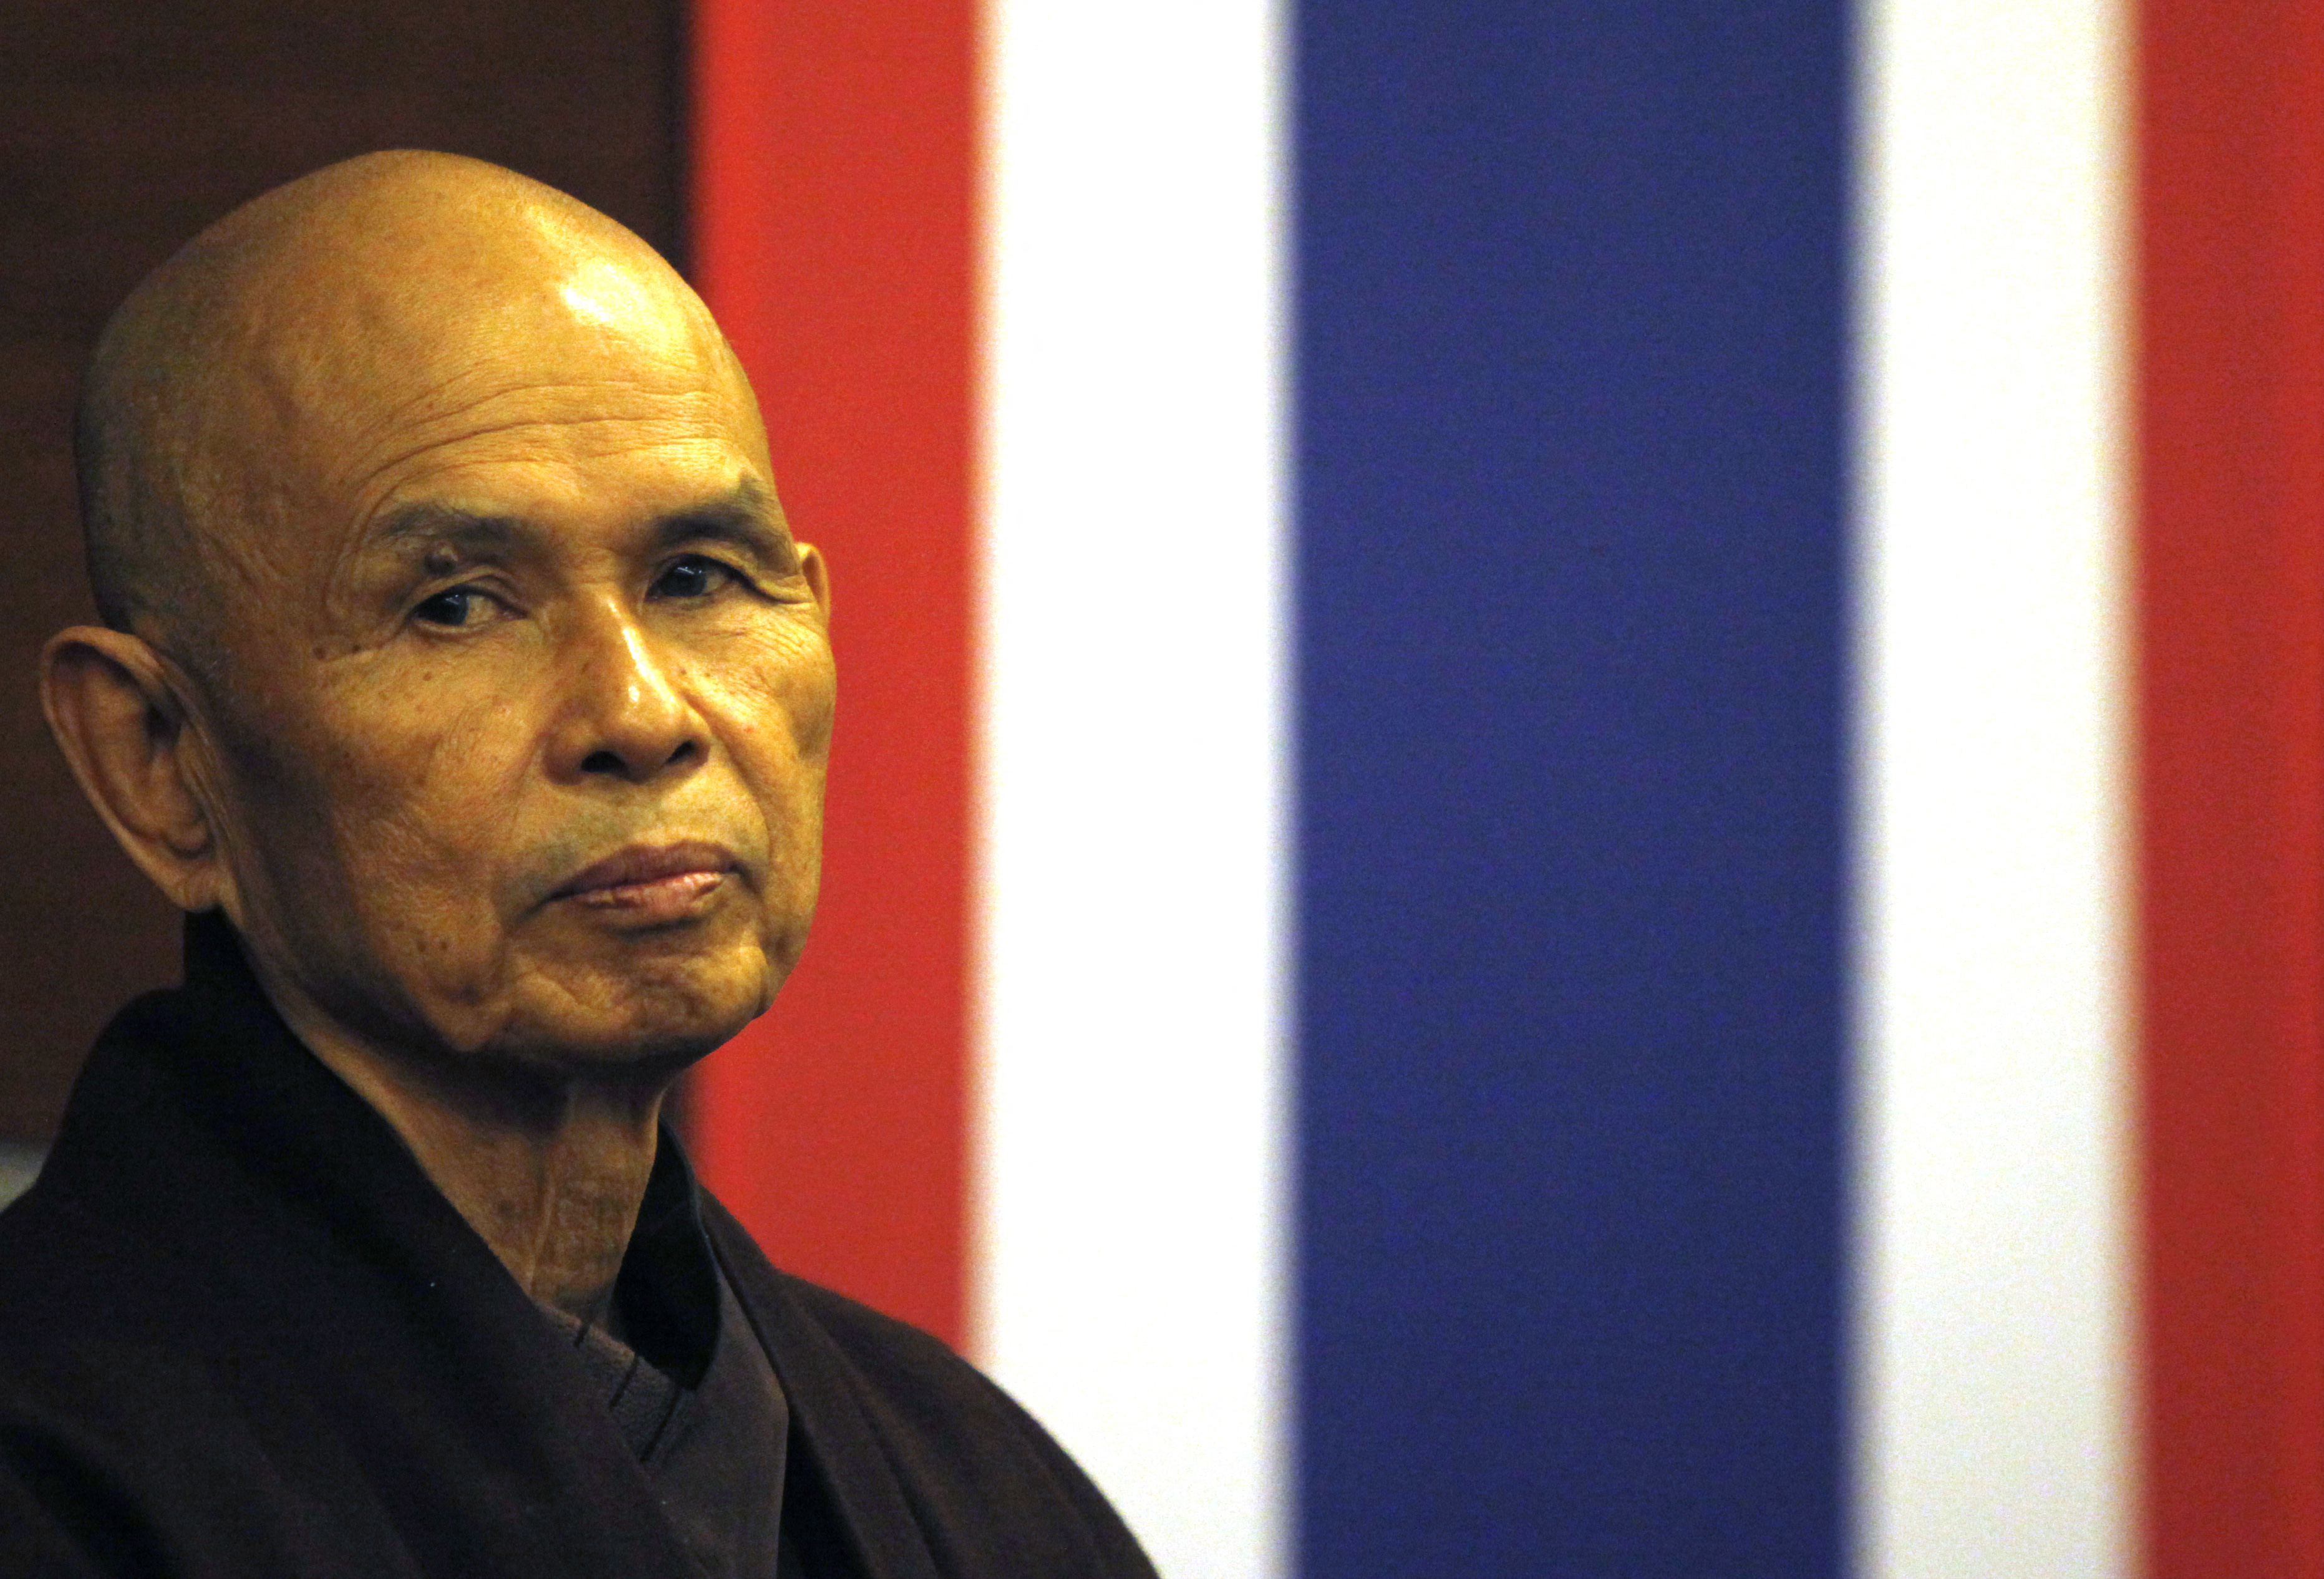 French-based Buddhist zen master Thich Nhat Hanh gestures during his arrival at Suvarnabhumi airport in Bangkok